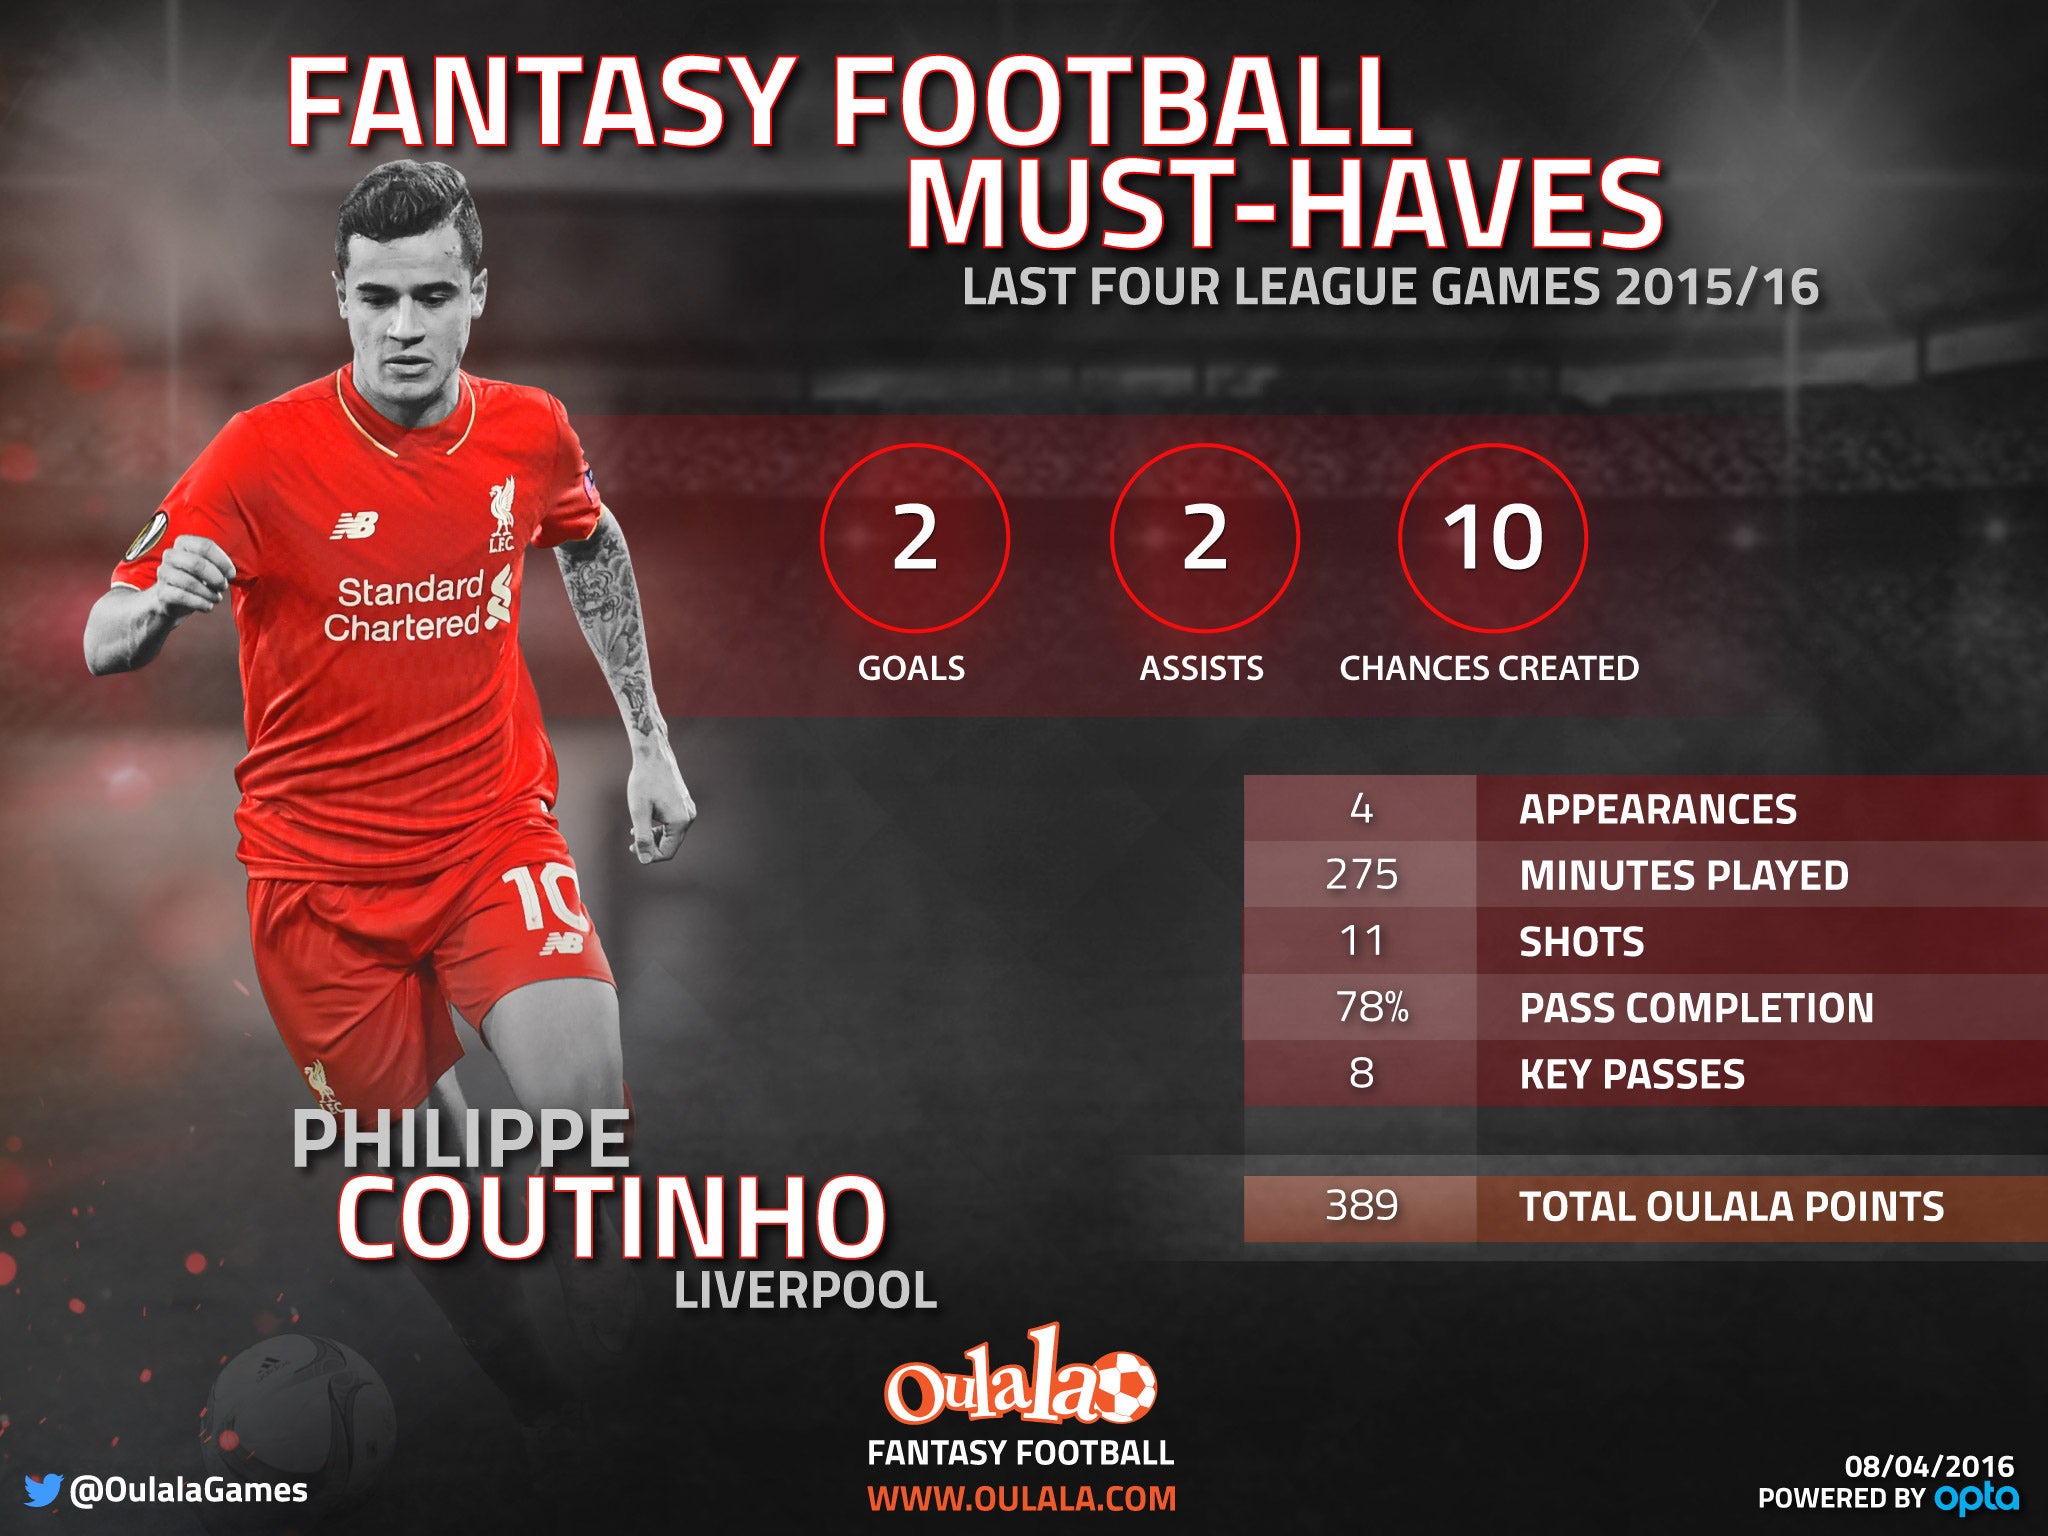 Liverpool's Philippe Coutinho has been in sparkling form of late